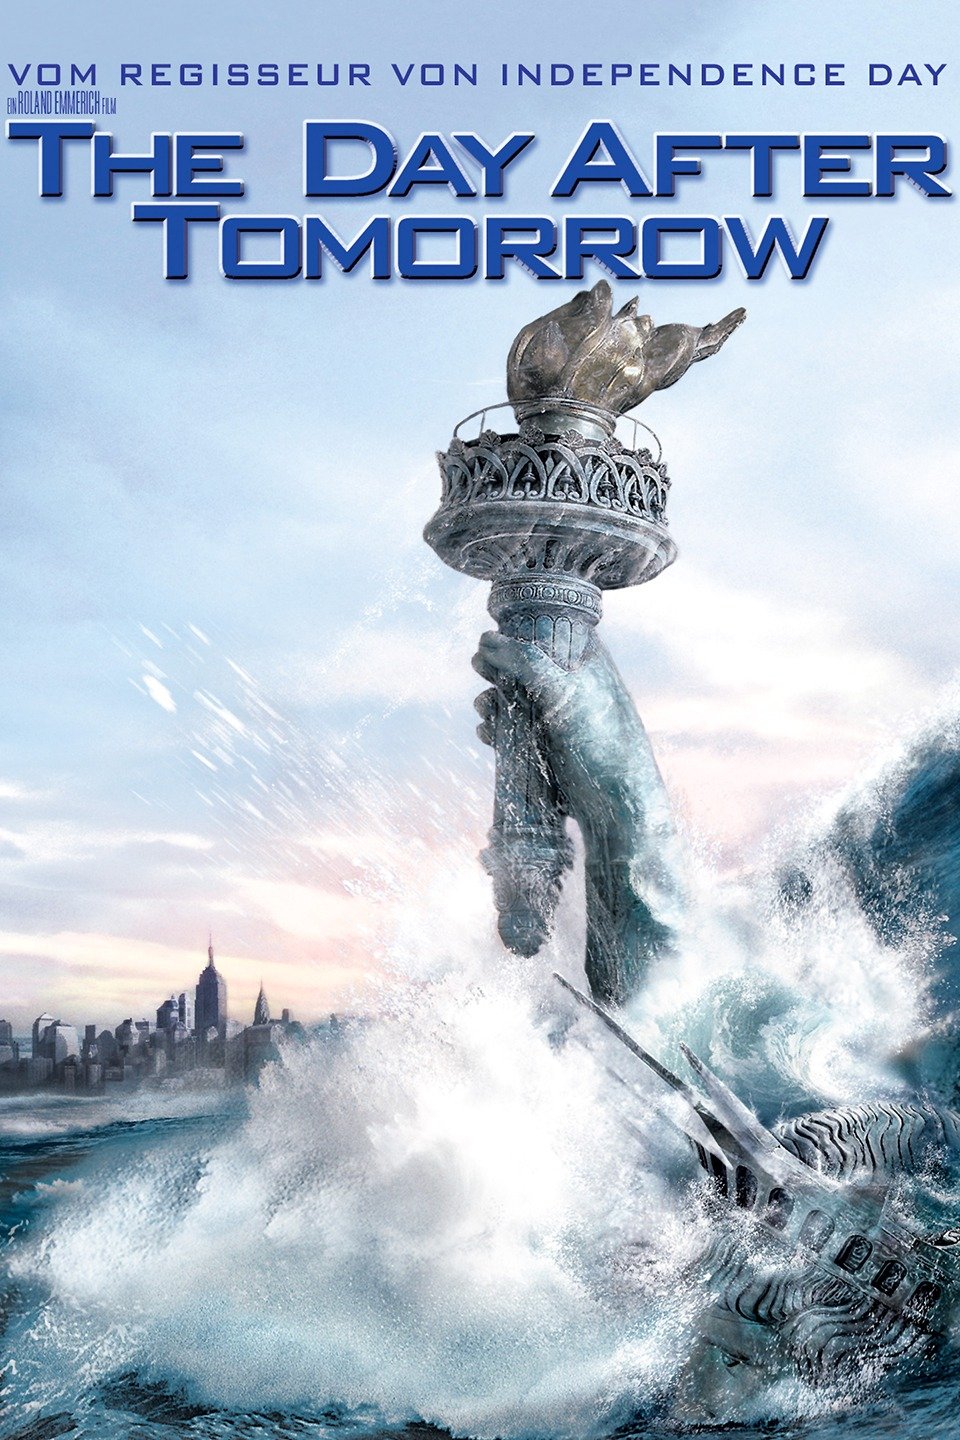 the day after tomorrow movie summary